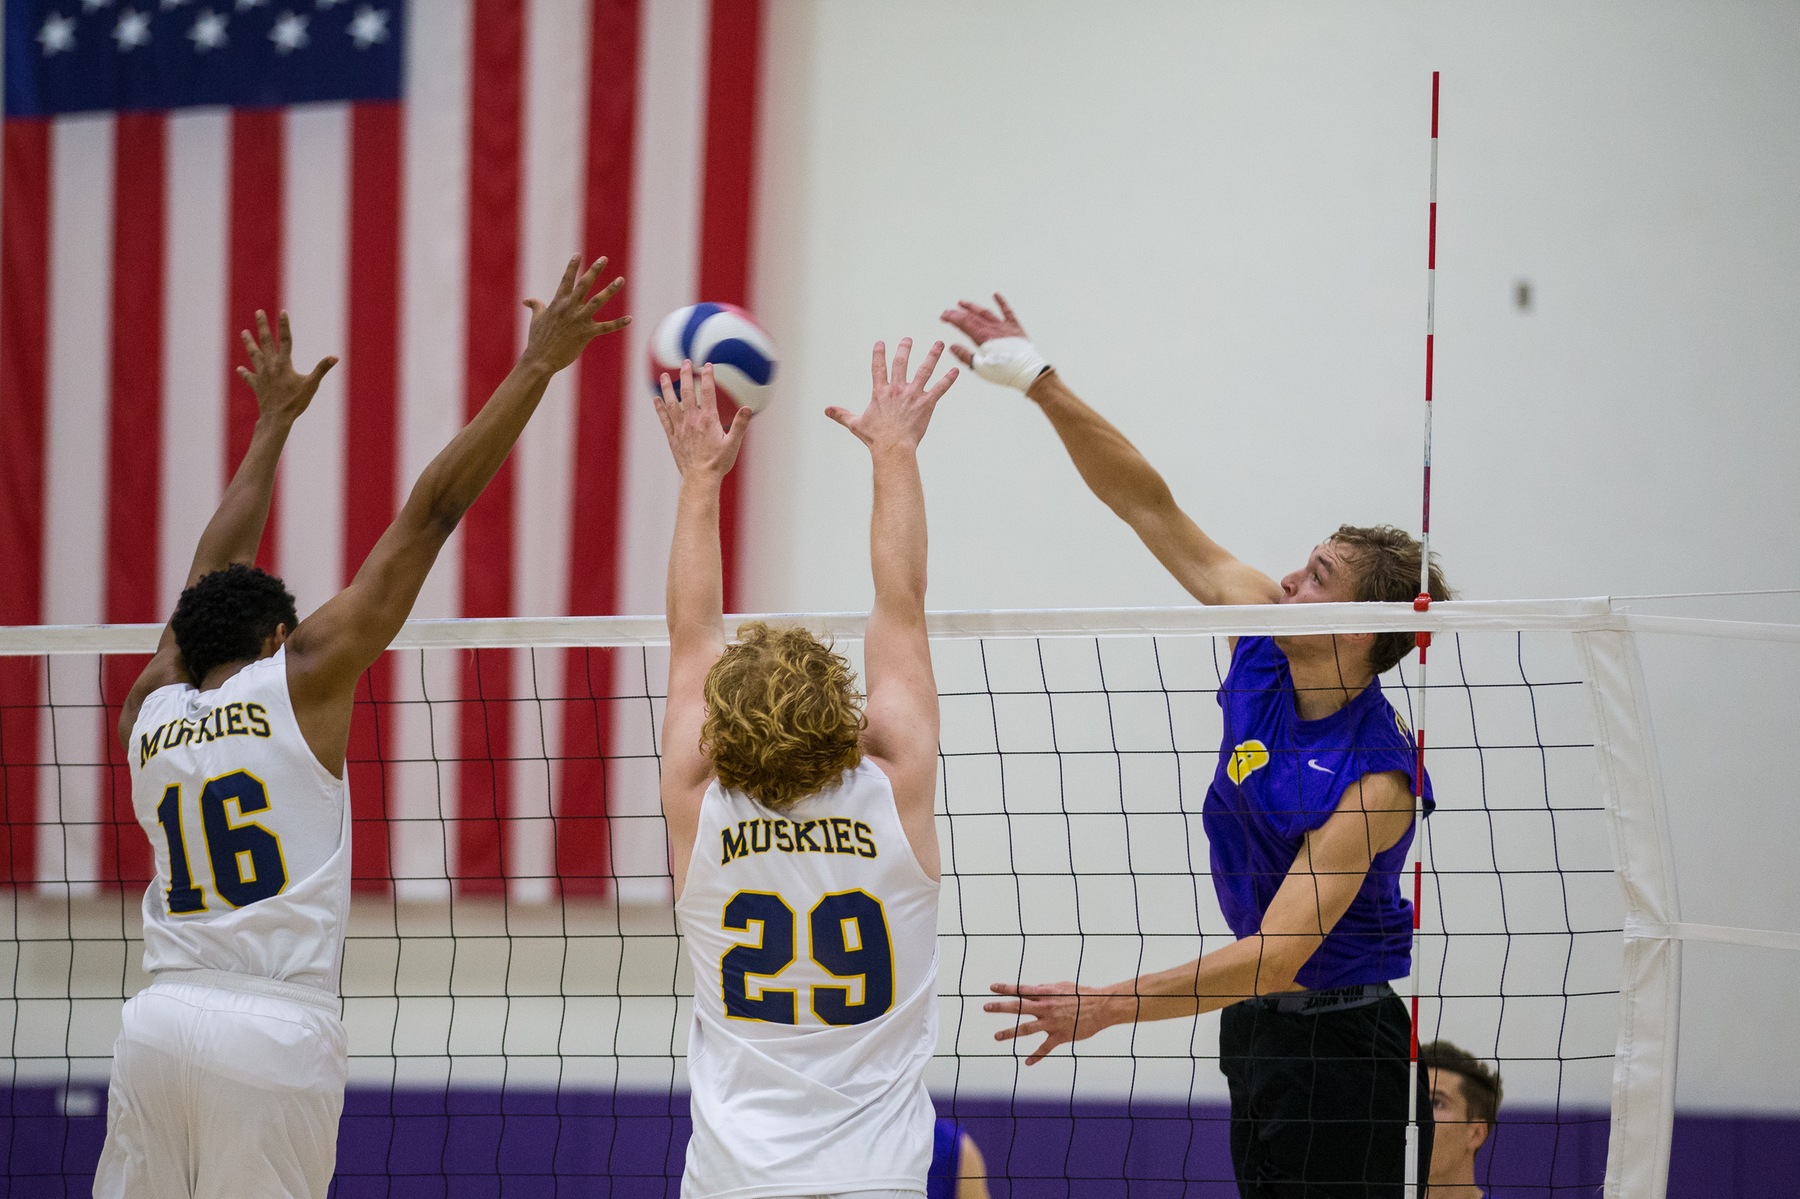 Patrick Rowe connects on a kill. (Photo by Dave Donovan)